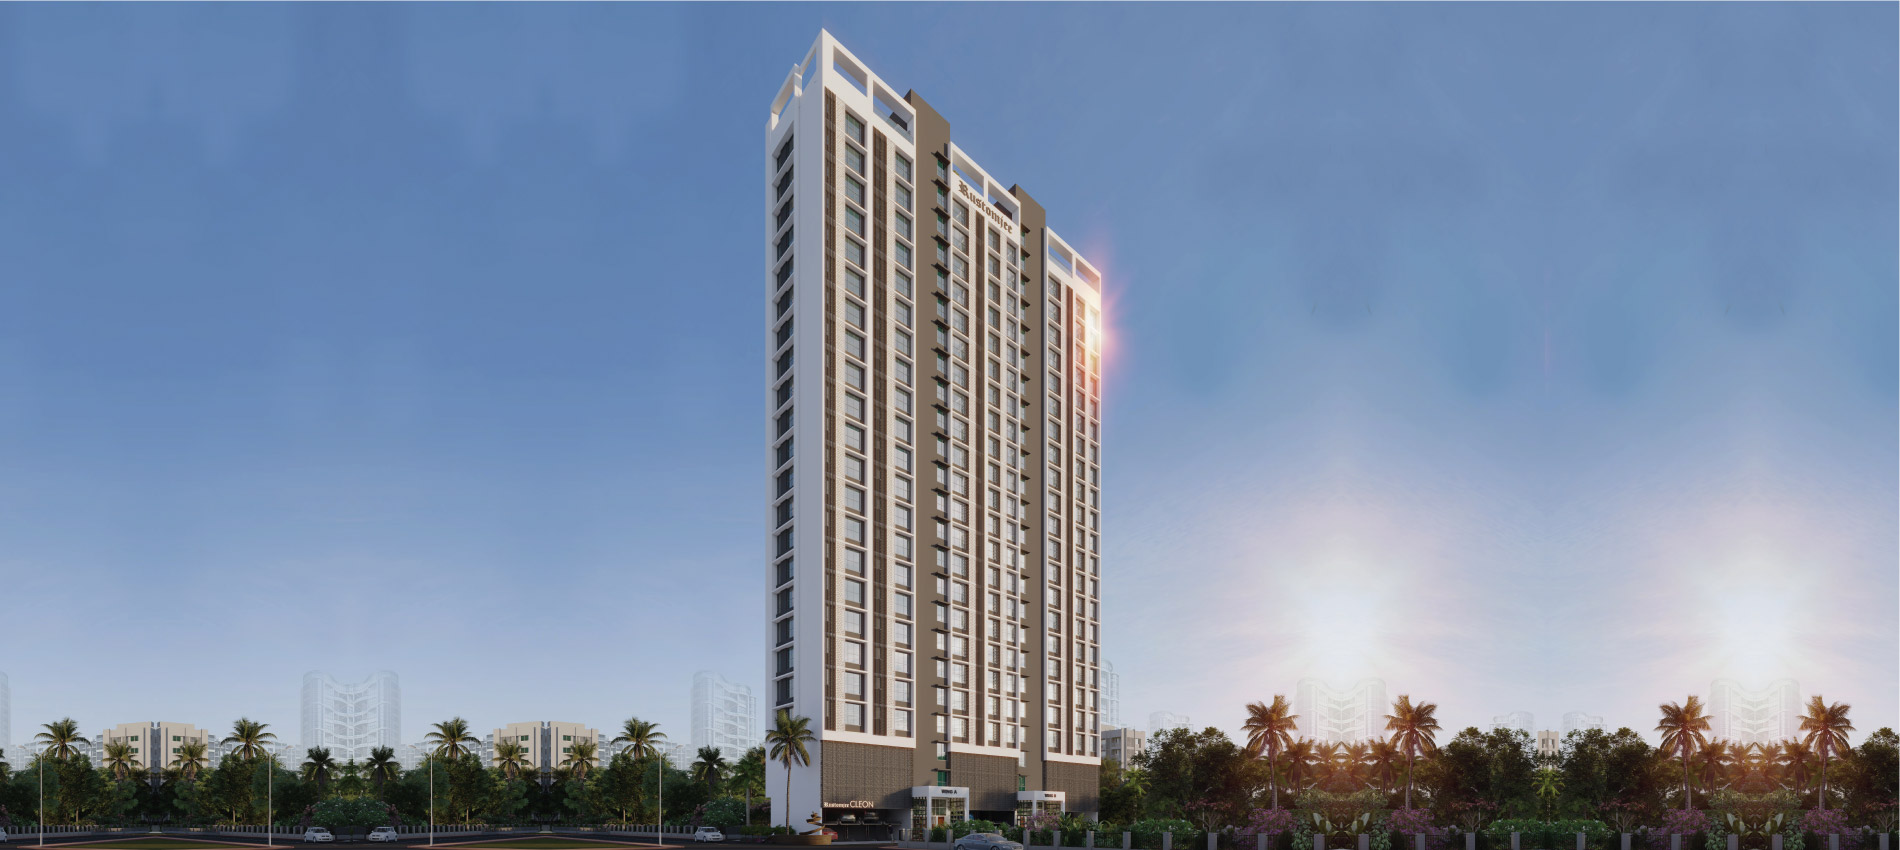 Flats in Bandra East at Rustomjee Cleon